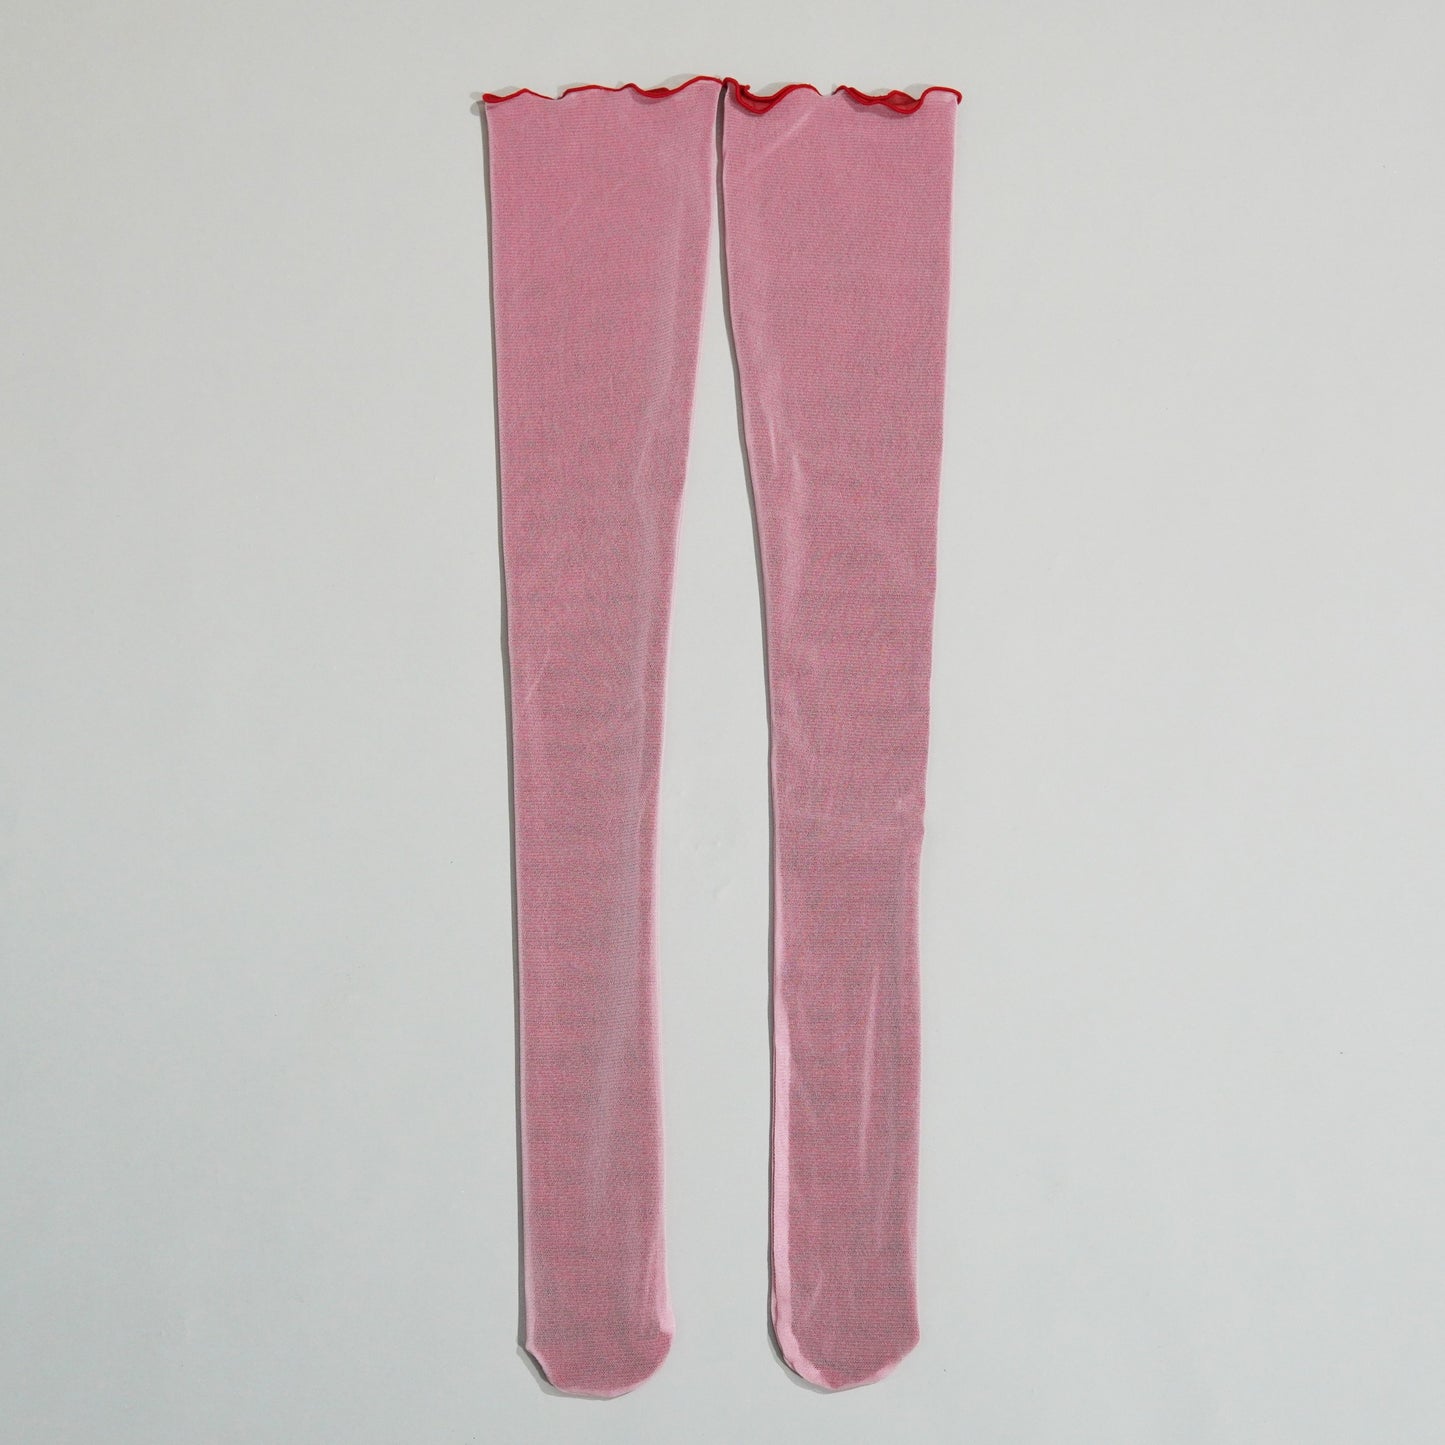 NON TOKYO / REVERSIBLE POWERNET LONG SOX (RED×PINK) /〈ノントーキョー〉リバーシブルパワーネットロングソックス (レッド×ピンク)